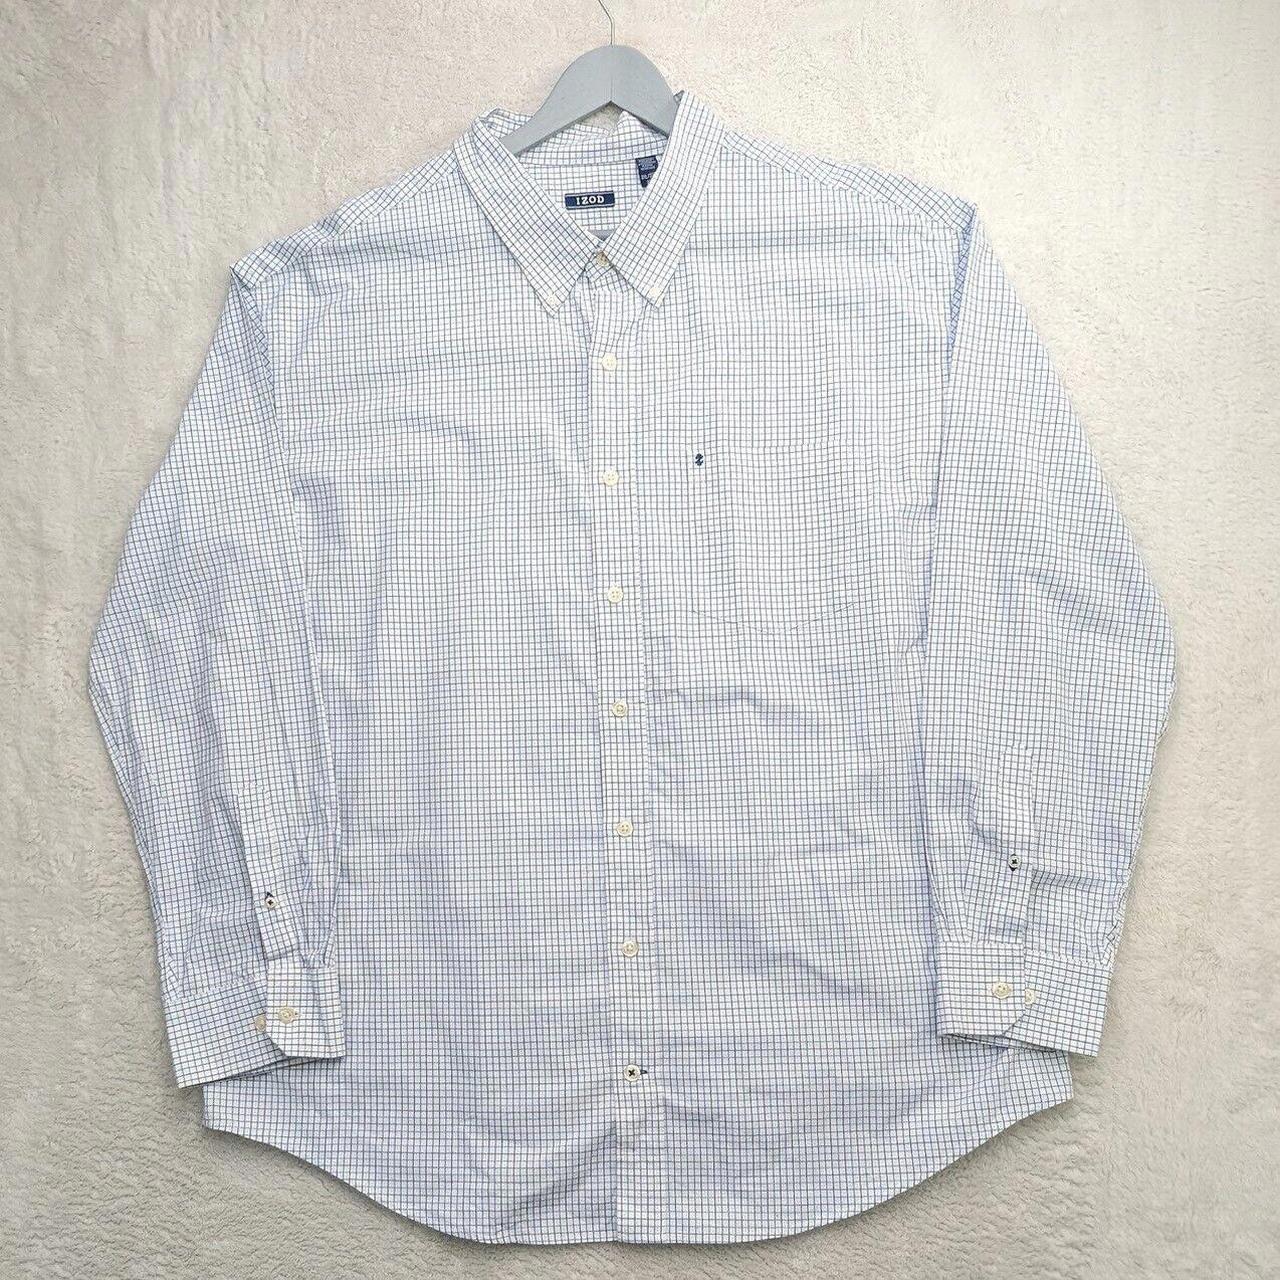 Mens Casual Shirt Blue White Checked Long Sleeve... - Depop